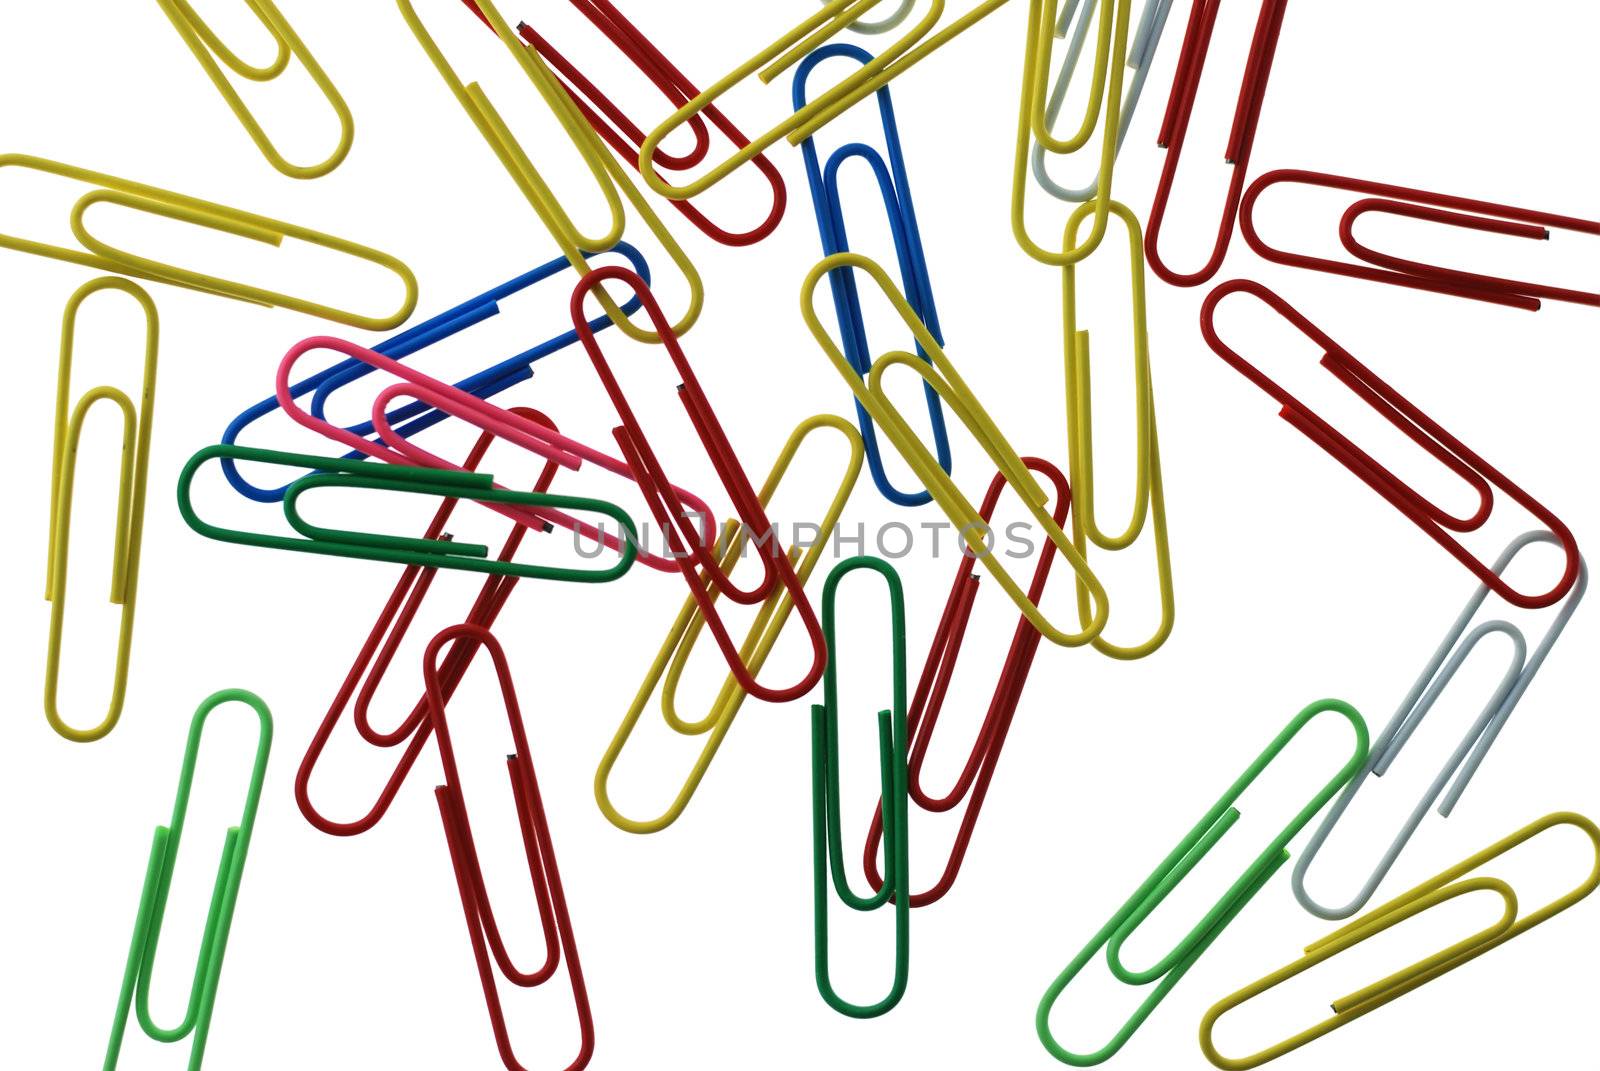 background from abstract office paper clips. It is isolated on a white background